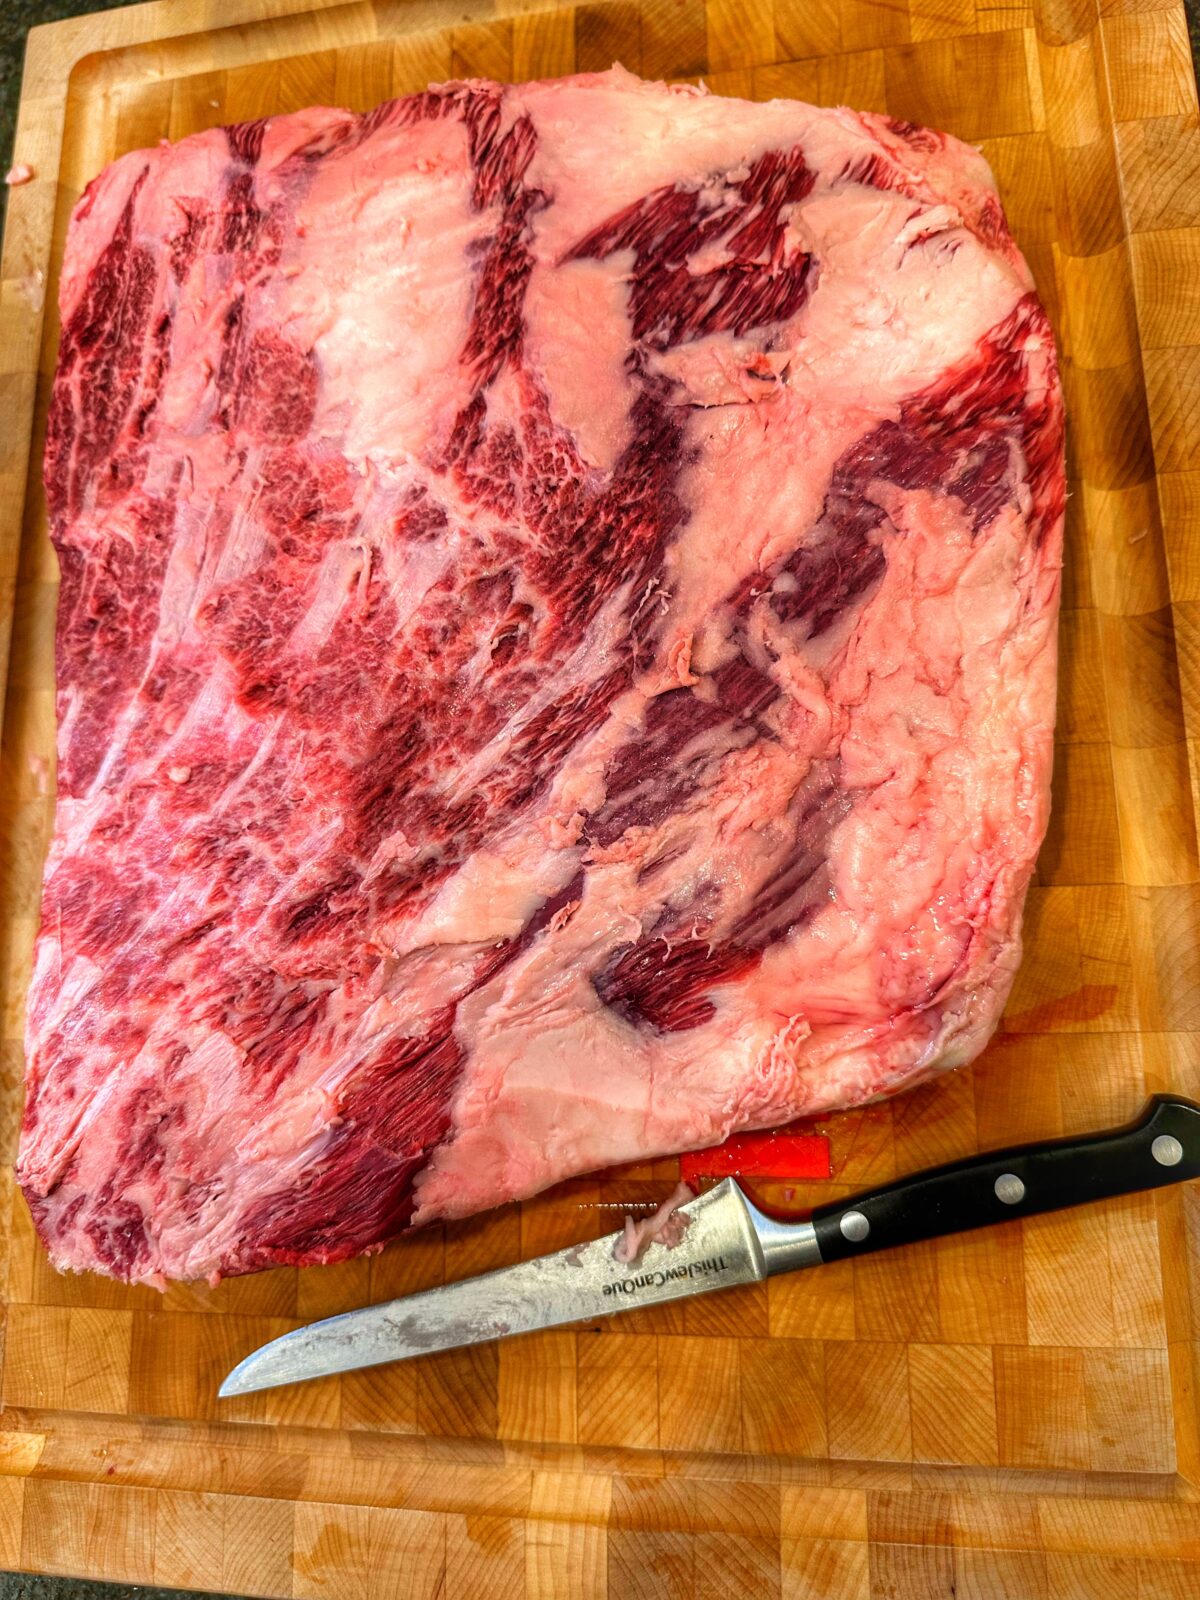 Trimmed beef plate ribs and a knife on a cutting board.